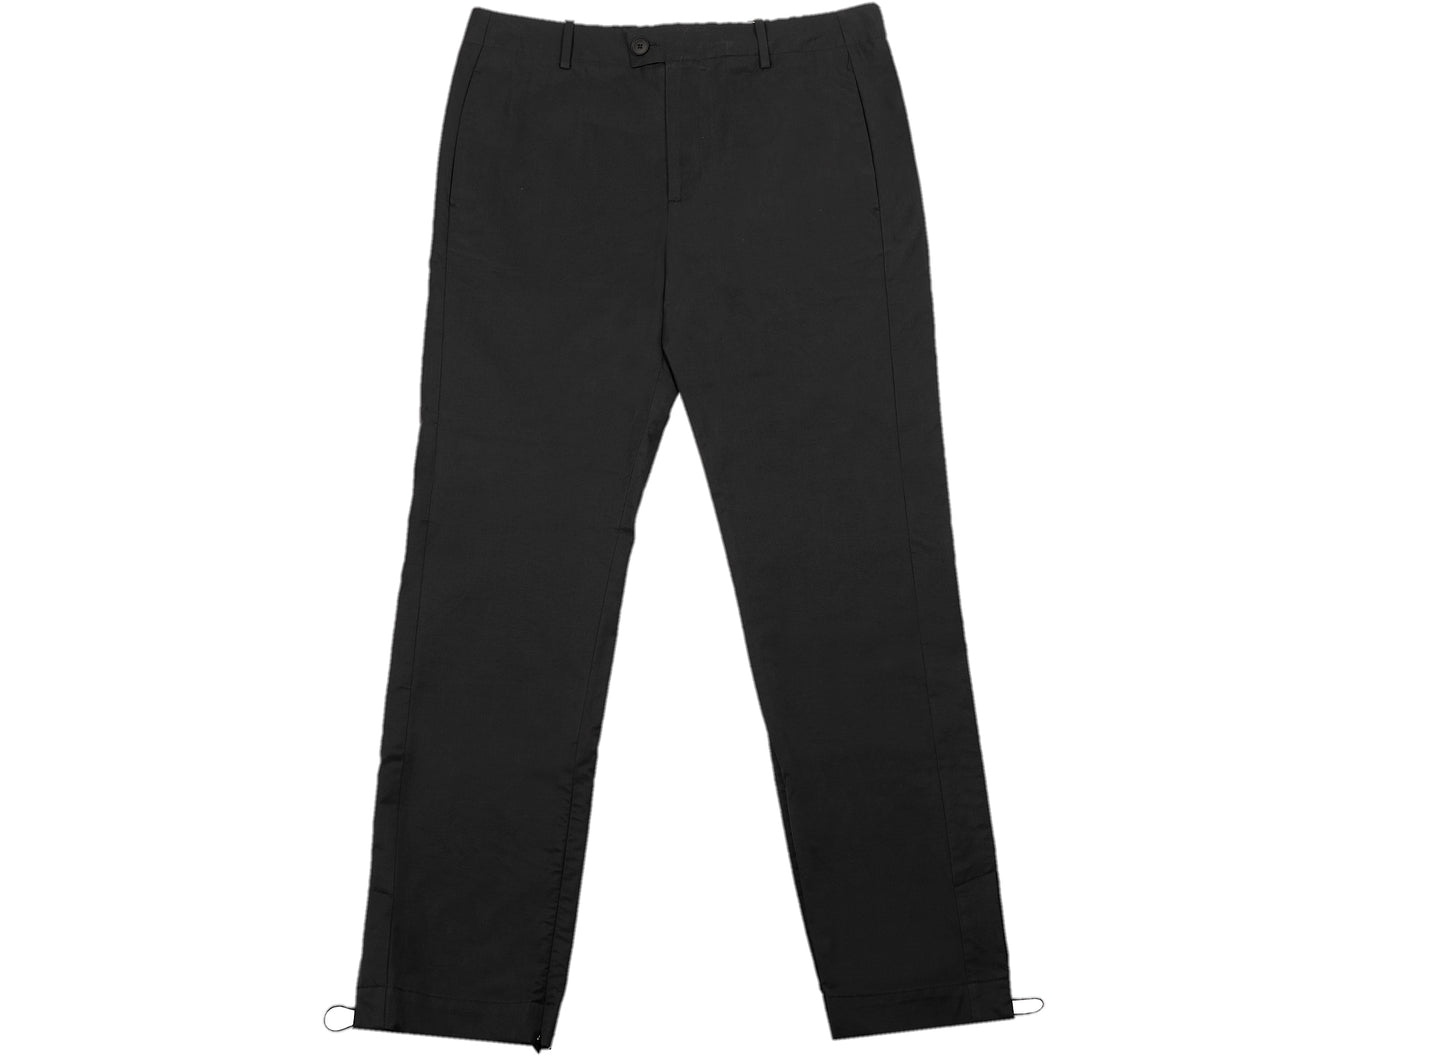 A-COLD-WALL* Treated Slim Trousers